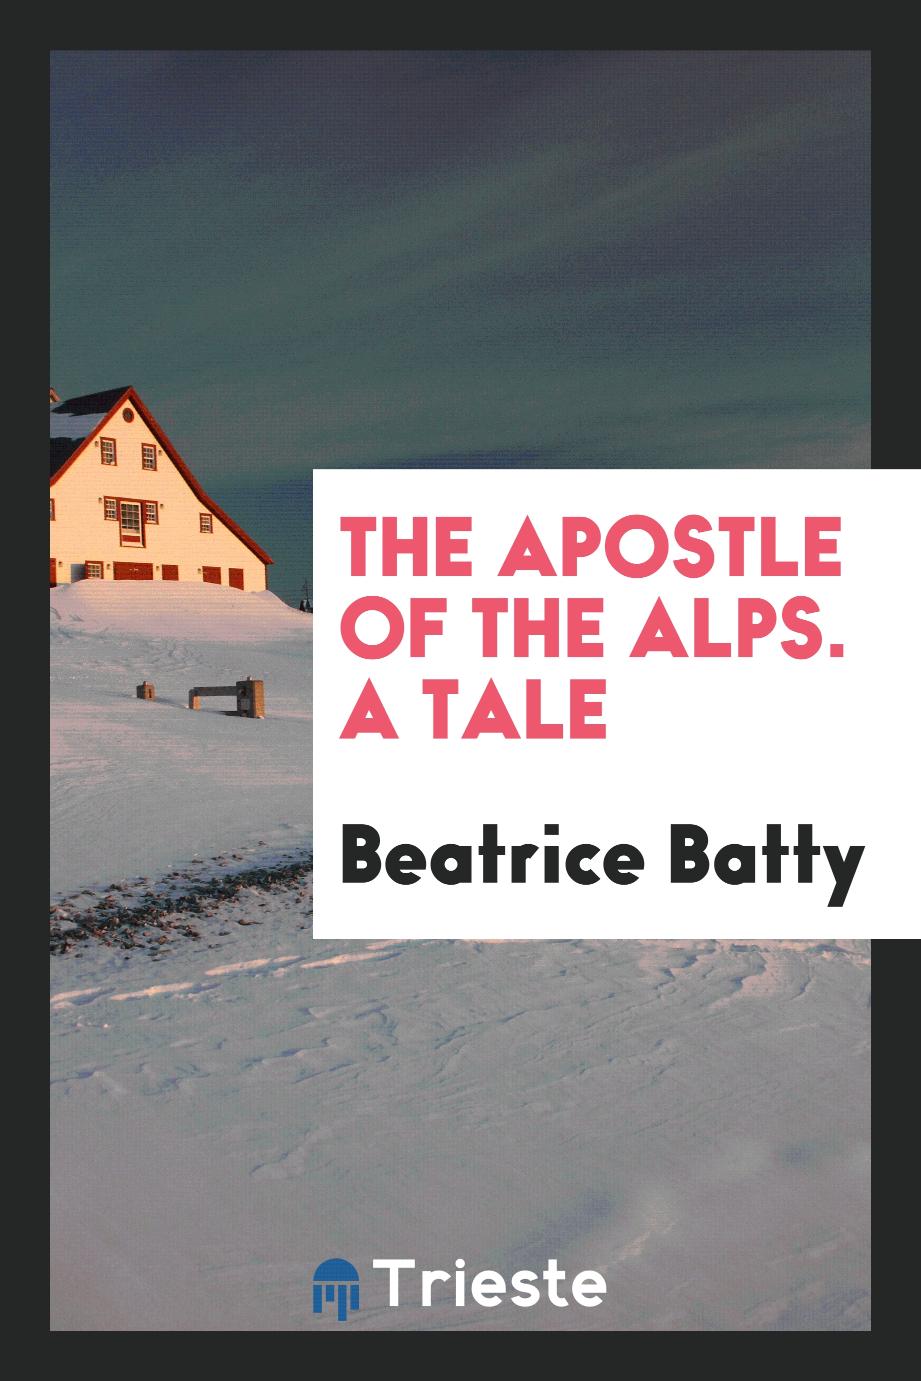 The Apostle of the Alps. A Tale